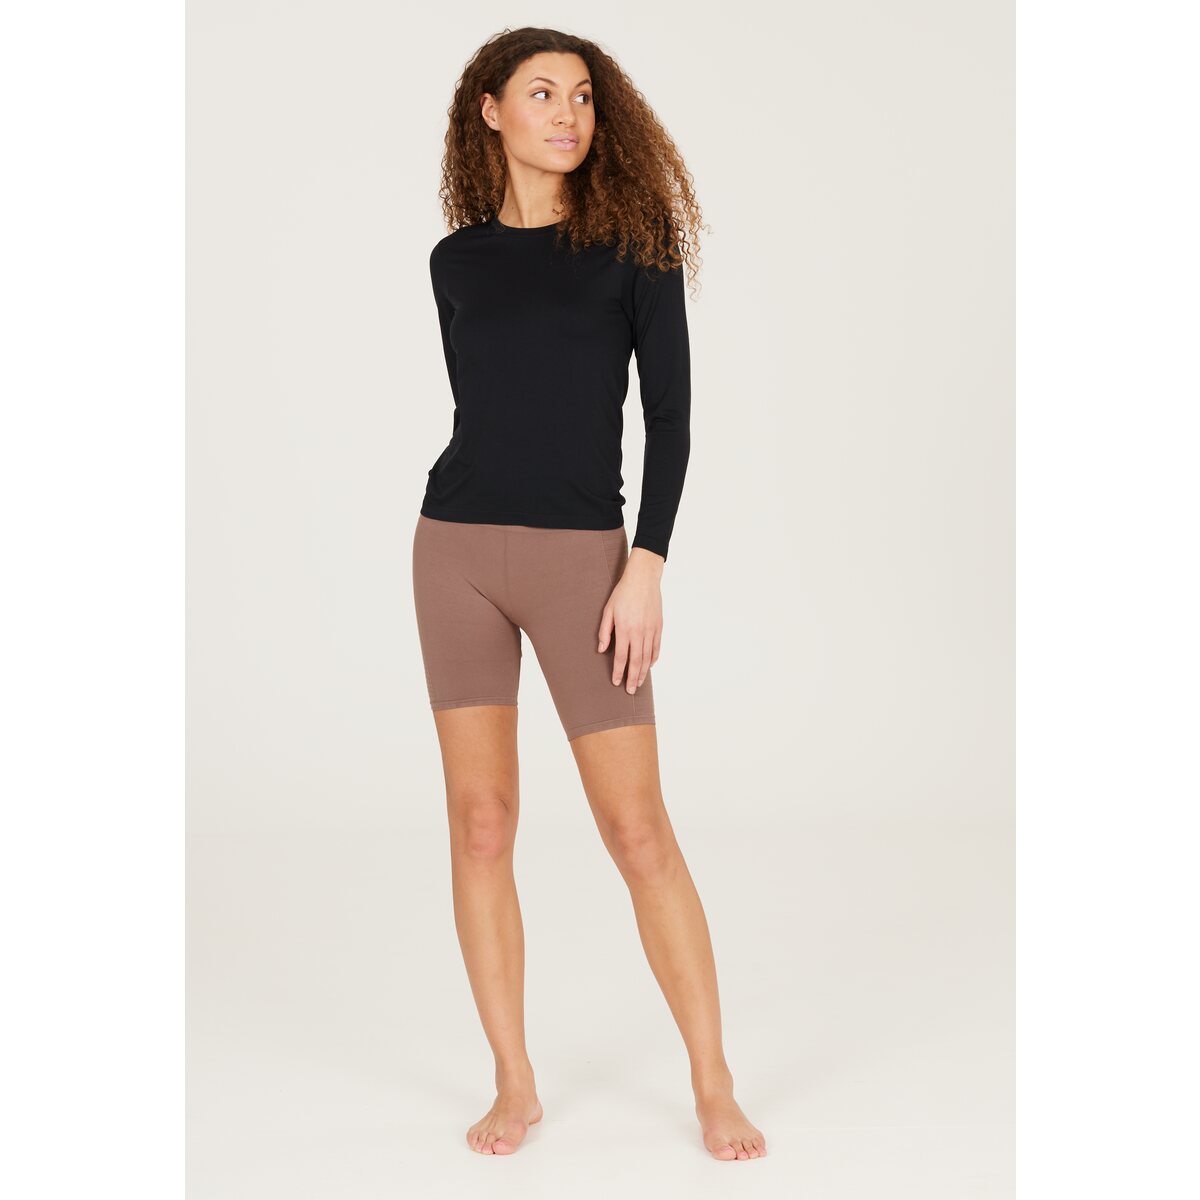 Athlecia Julee Womenswear Loose Fit Long Sleeve Seamless Tee - Black 3 Shaws Department Stores